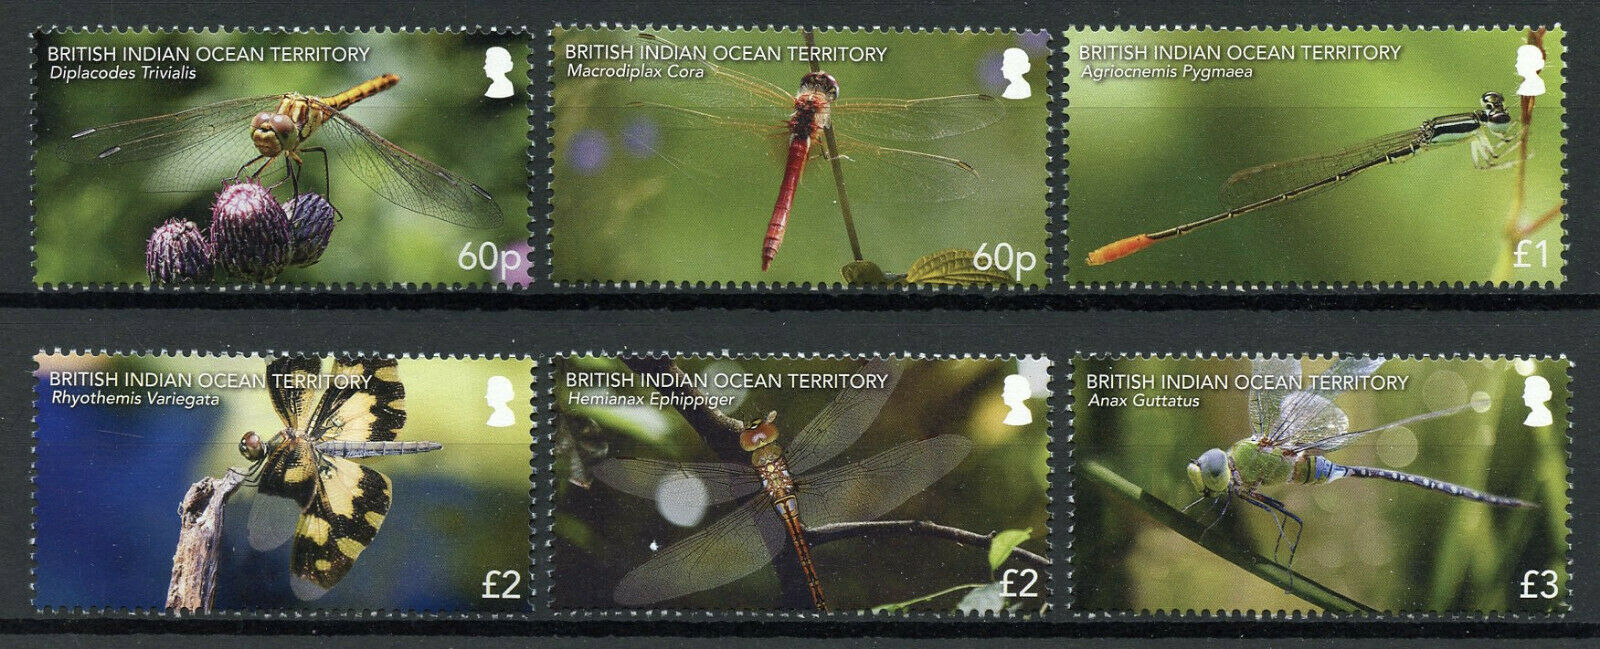 BIOT 2019 MNH Insects Stamps Dragonflies Dragonfly 6v Set